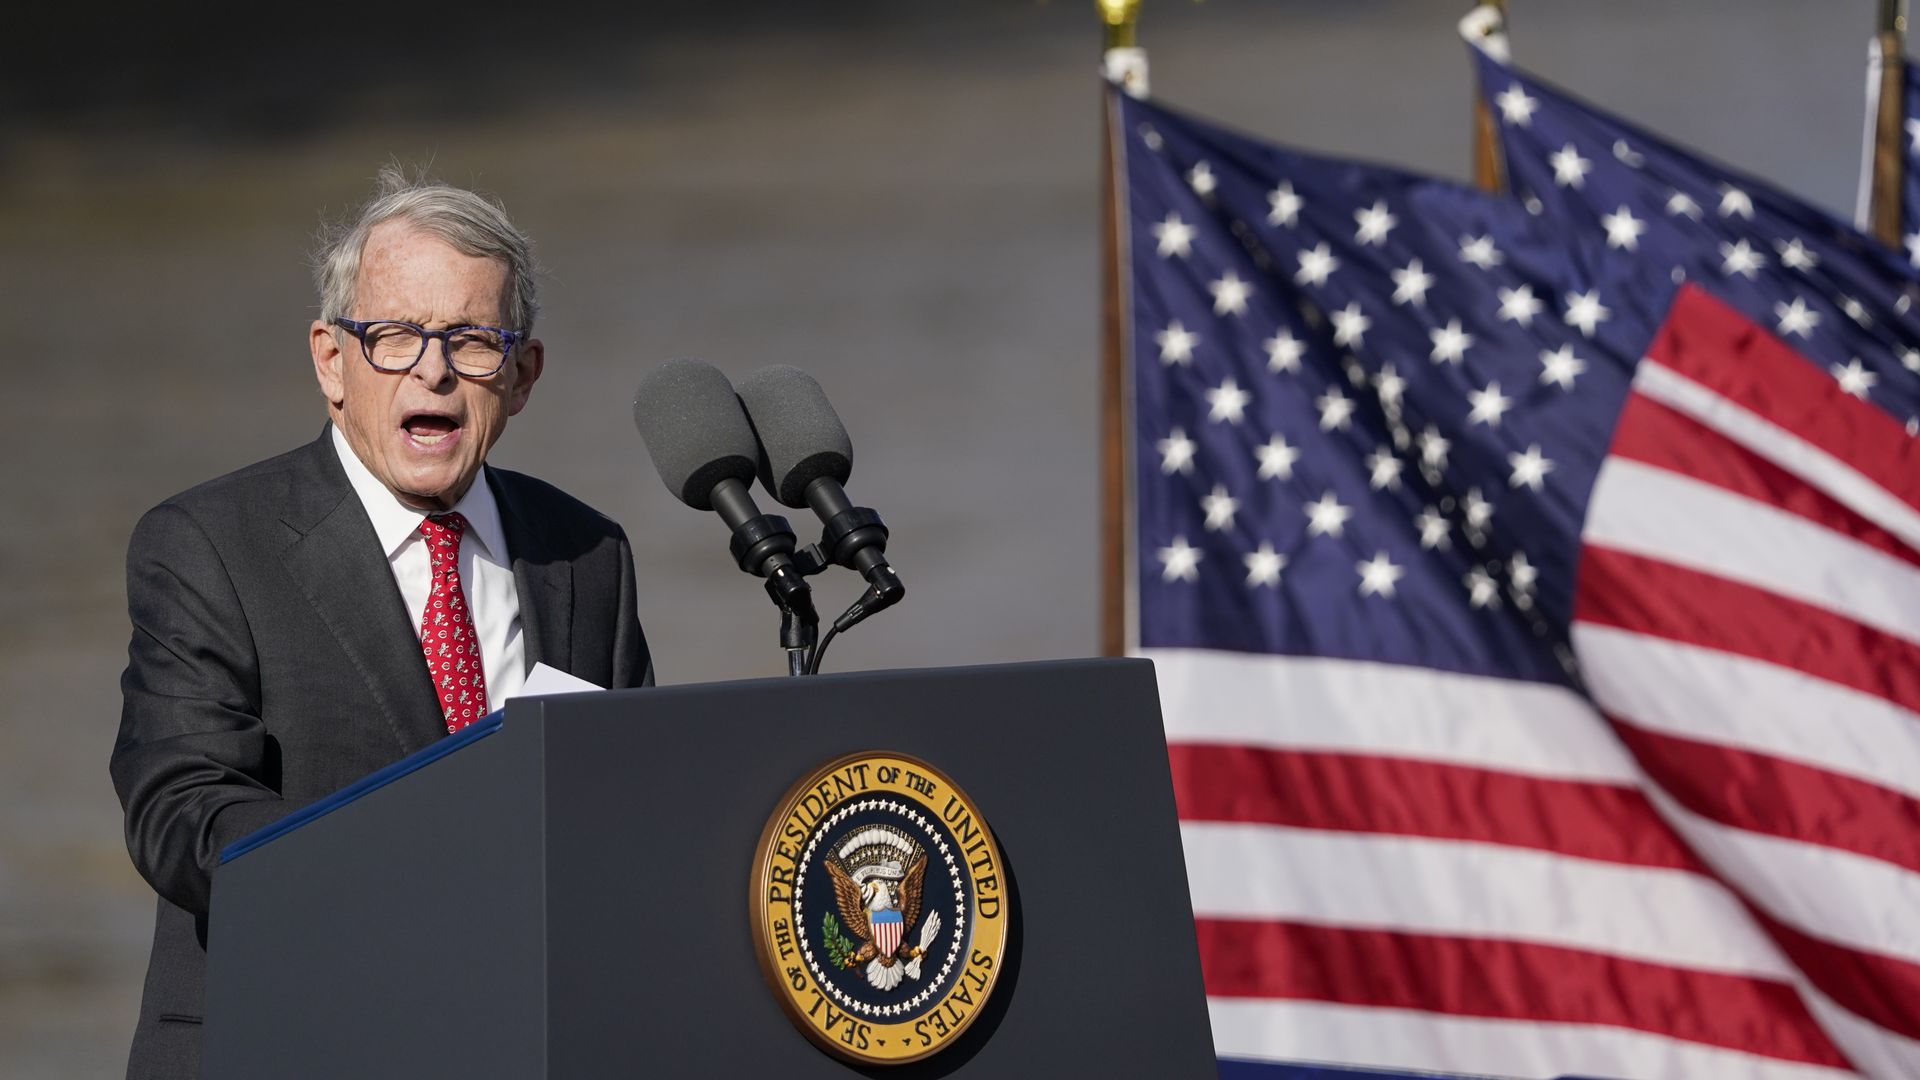 Mike DeWine, governor of Ohio, speaks during an event in Covington, Kentucky, US, on Wednesday, Jan. 4.